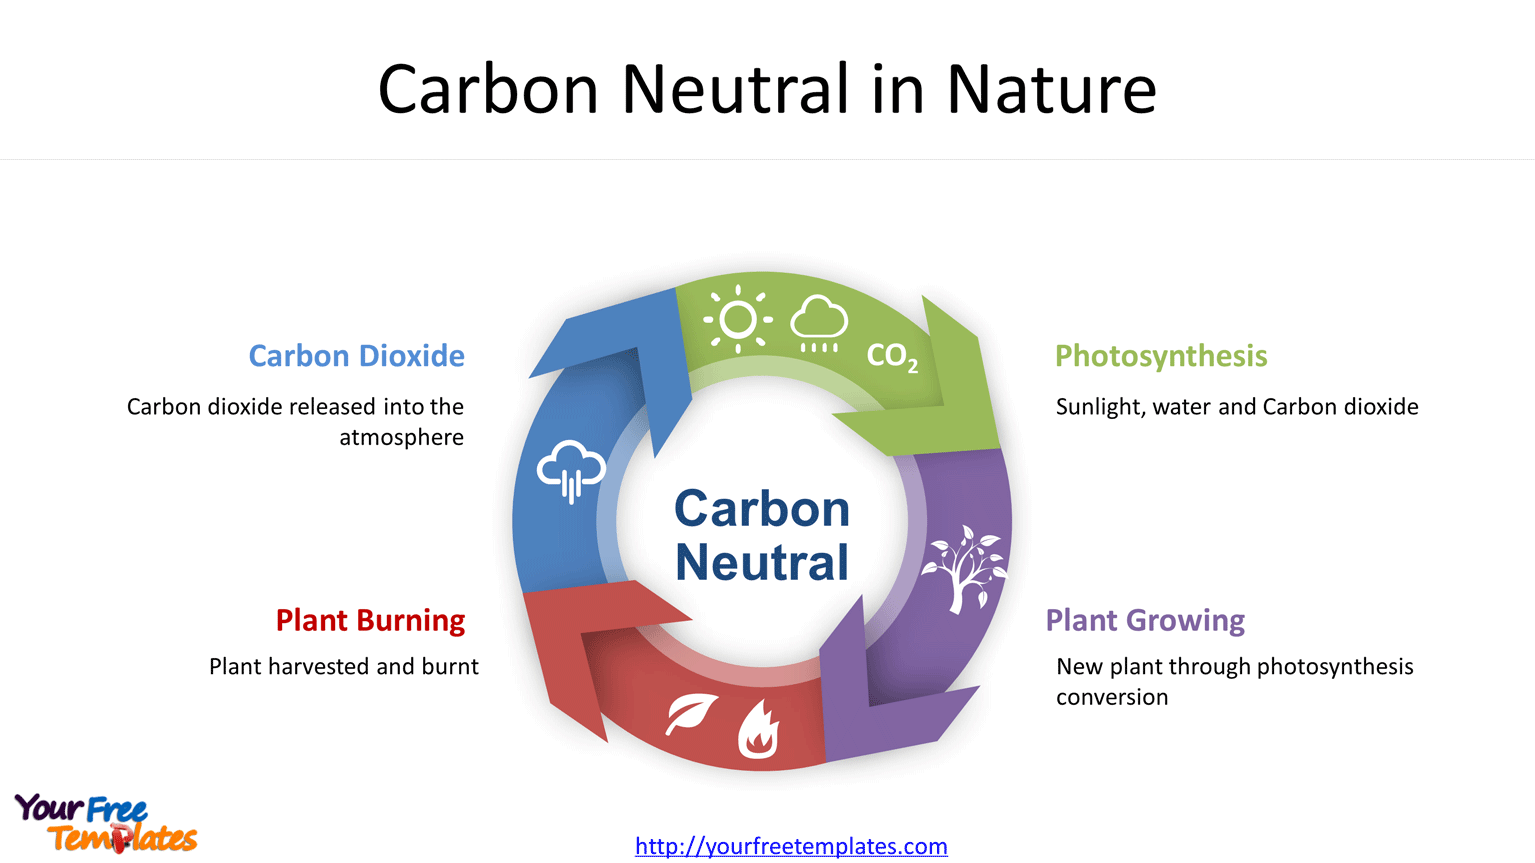 Carbon neutral diagram and icons to demonstrate the buzzword.